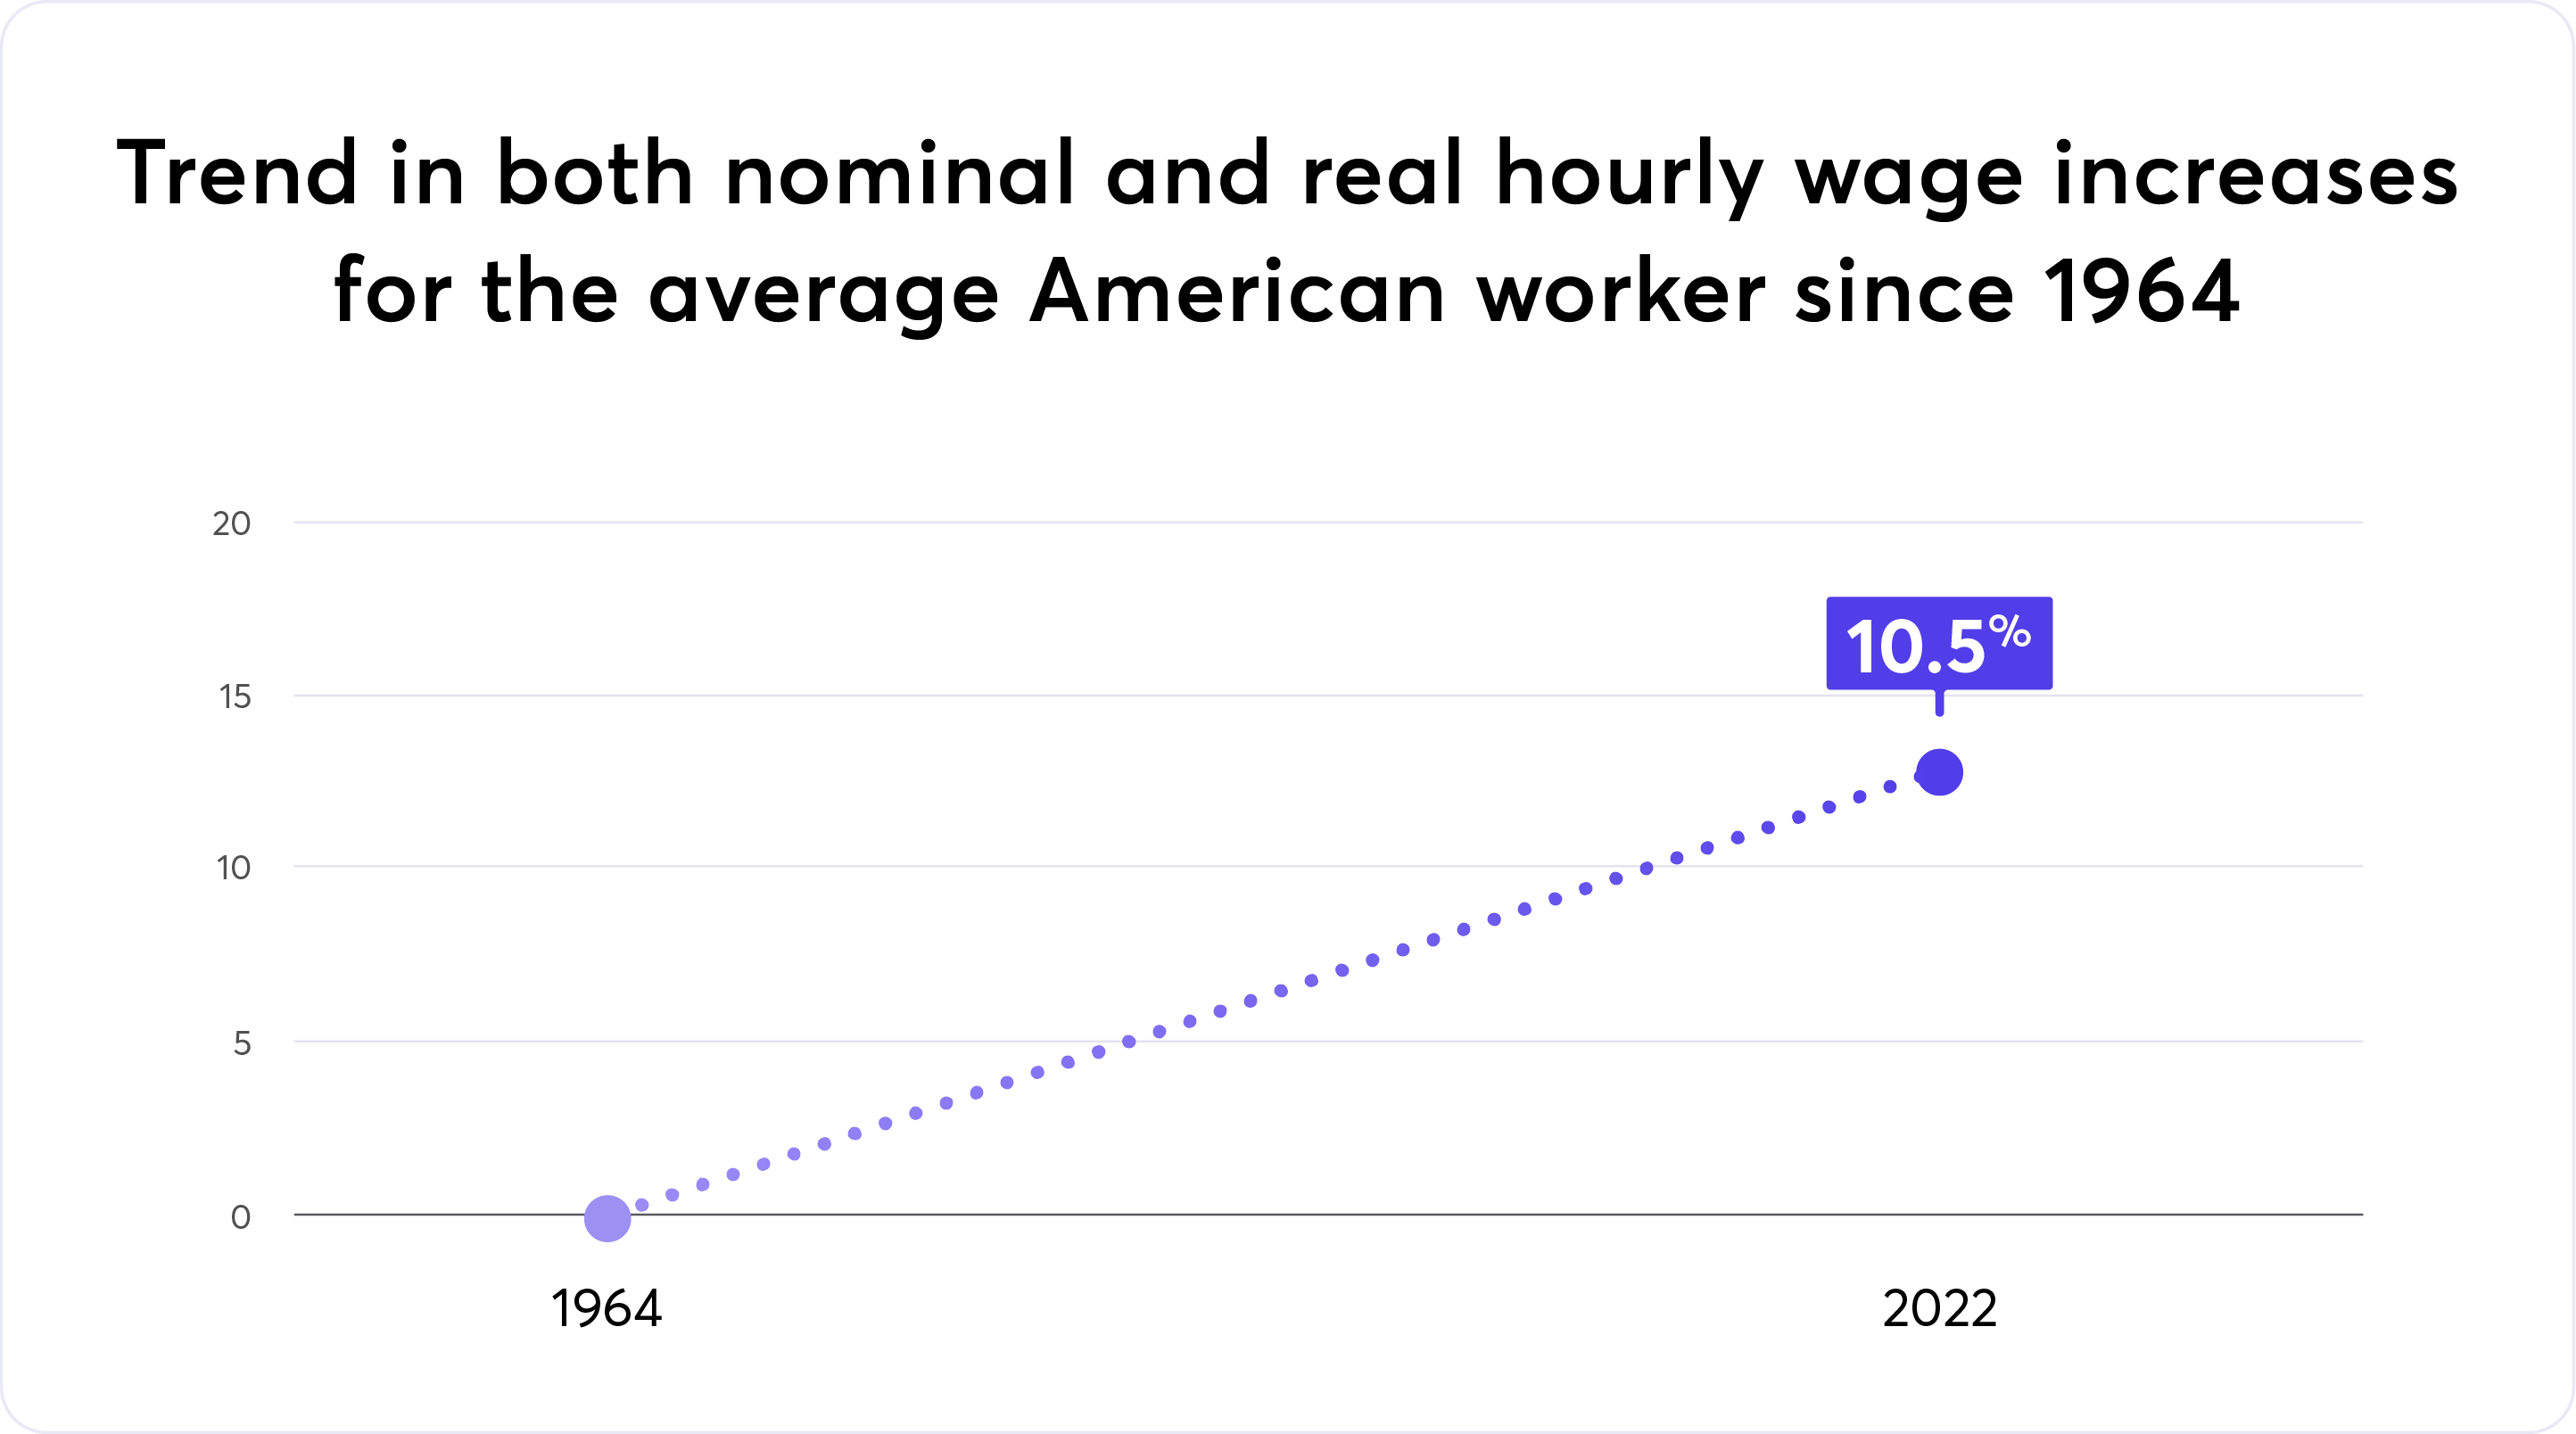 Trend in both nominal and real hourly wage increases for the average American worker since 1964 graphic